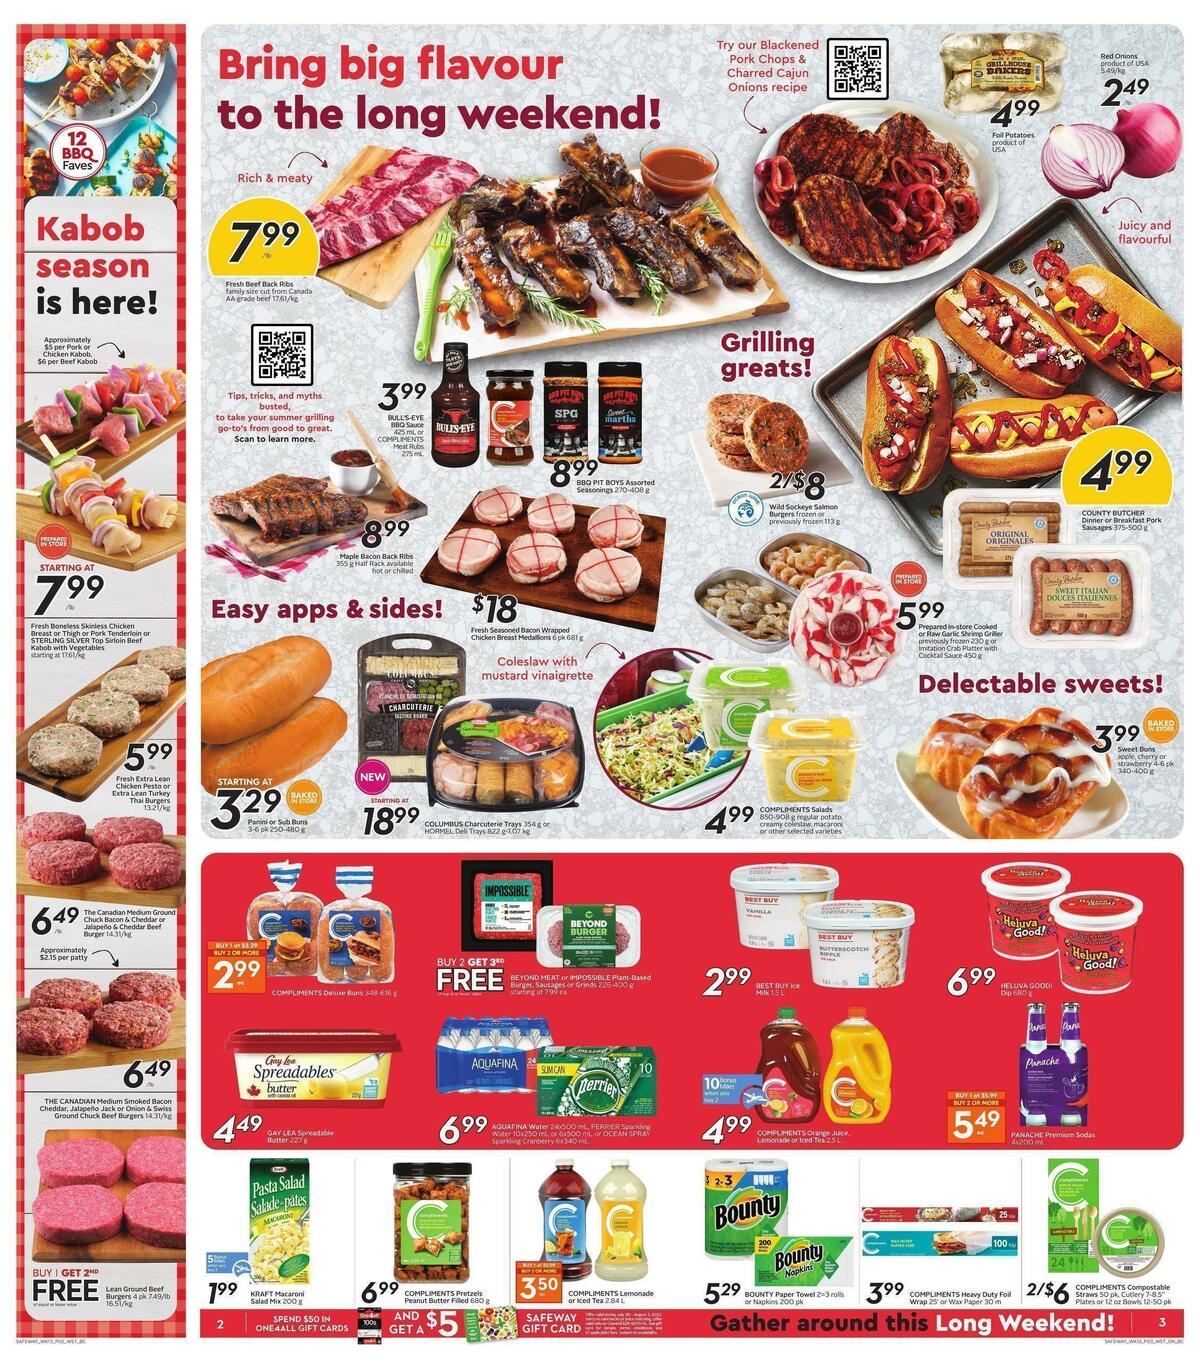 Safeway Flyer from July 28